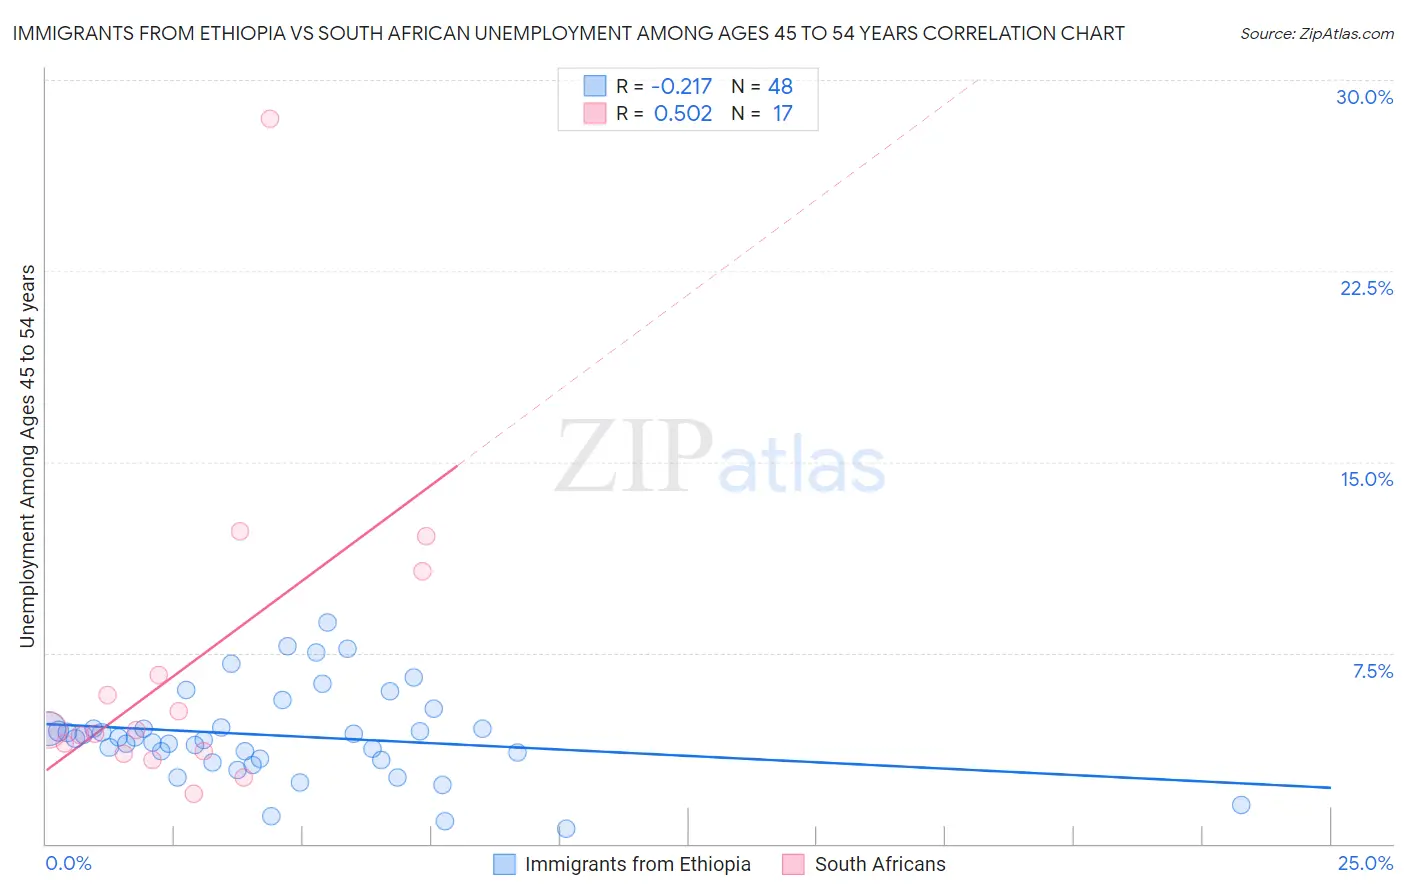 Immigrants from Ethiopia vs South African Unemployment Among Ages 45 to 54 years